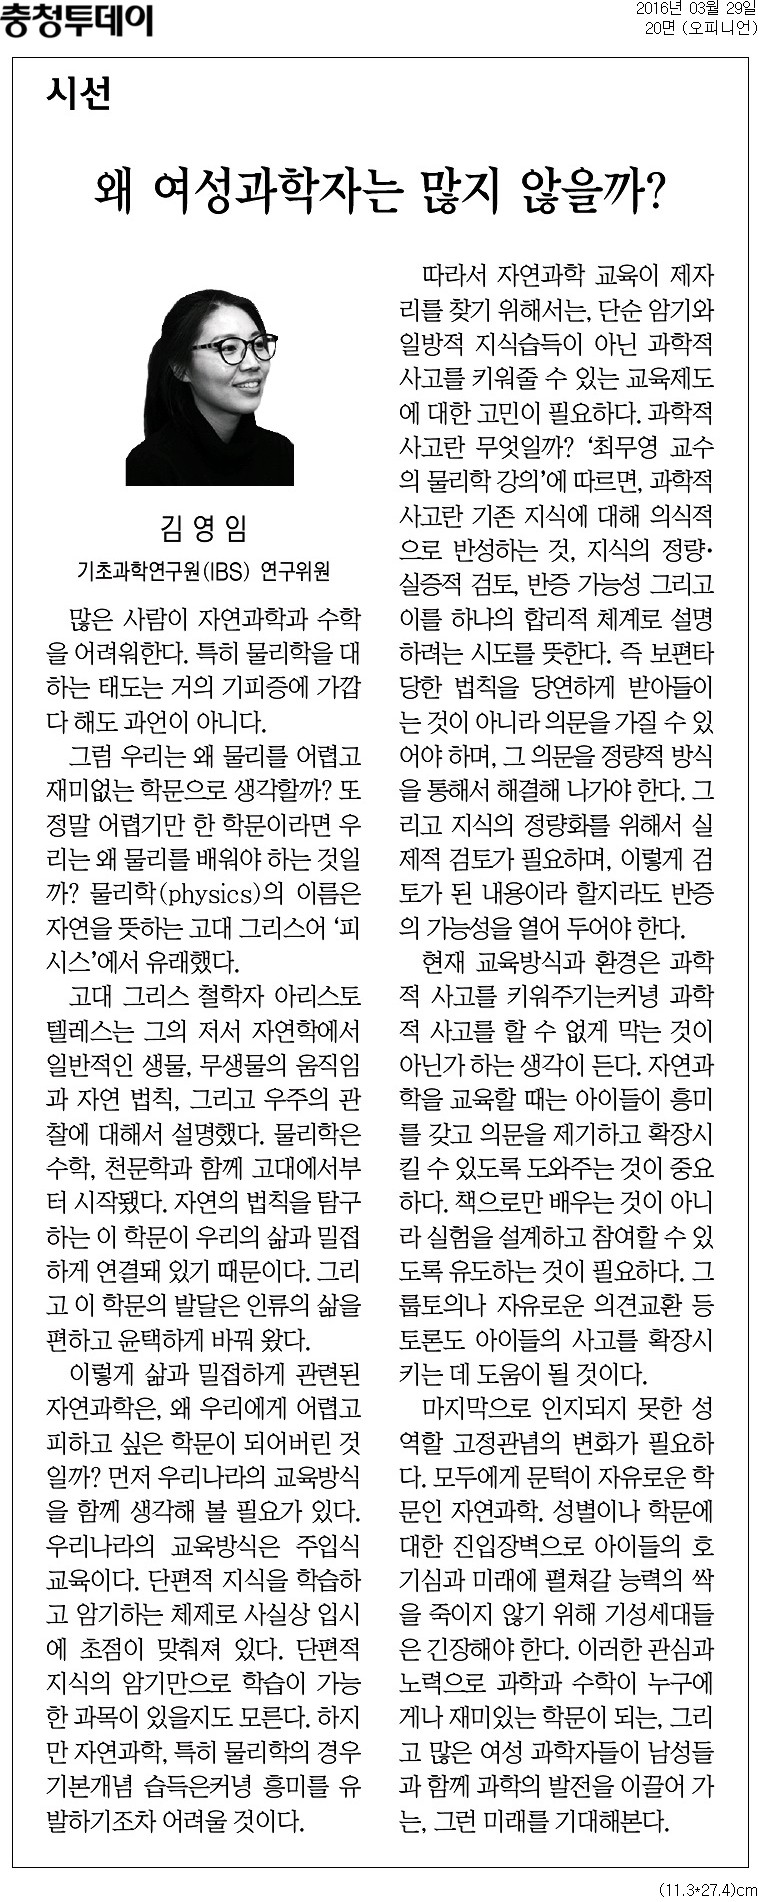 Newspaper Article on Physics Education - Chungcheong Today (March 29, 2016) 사진